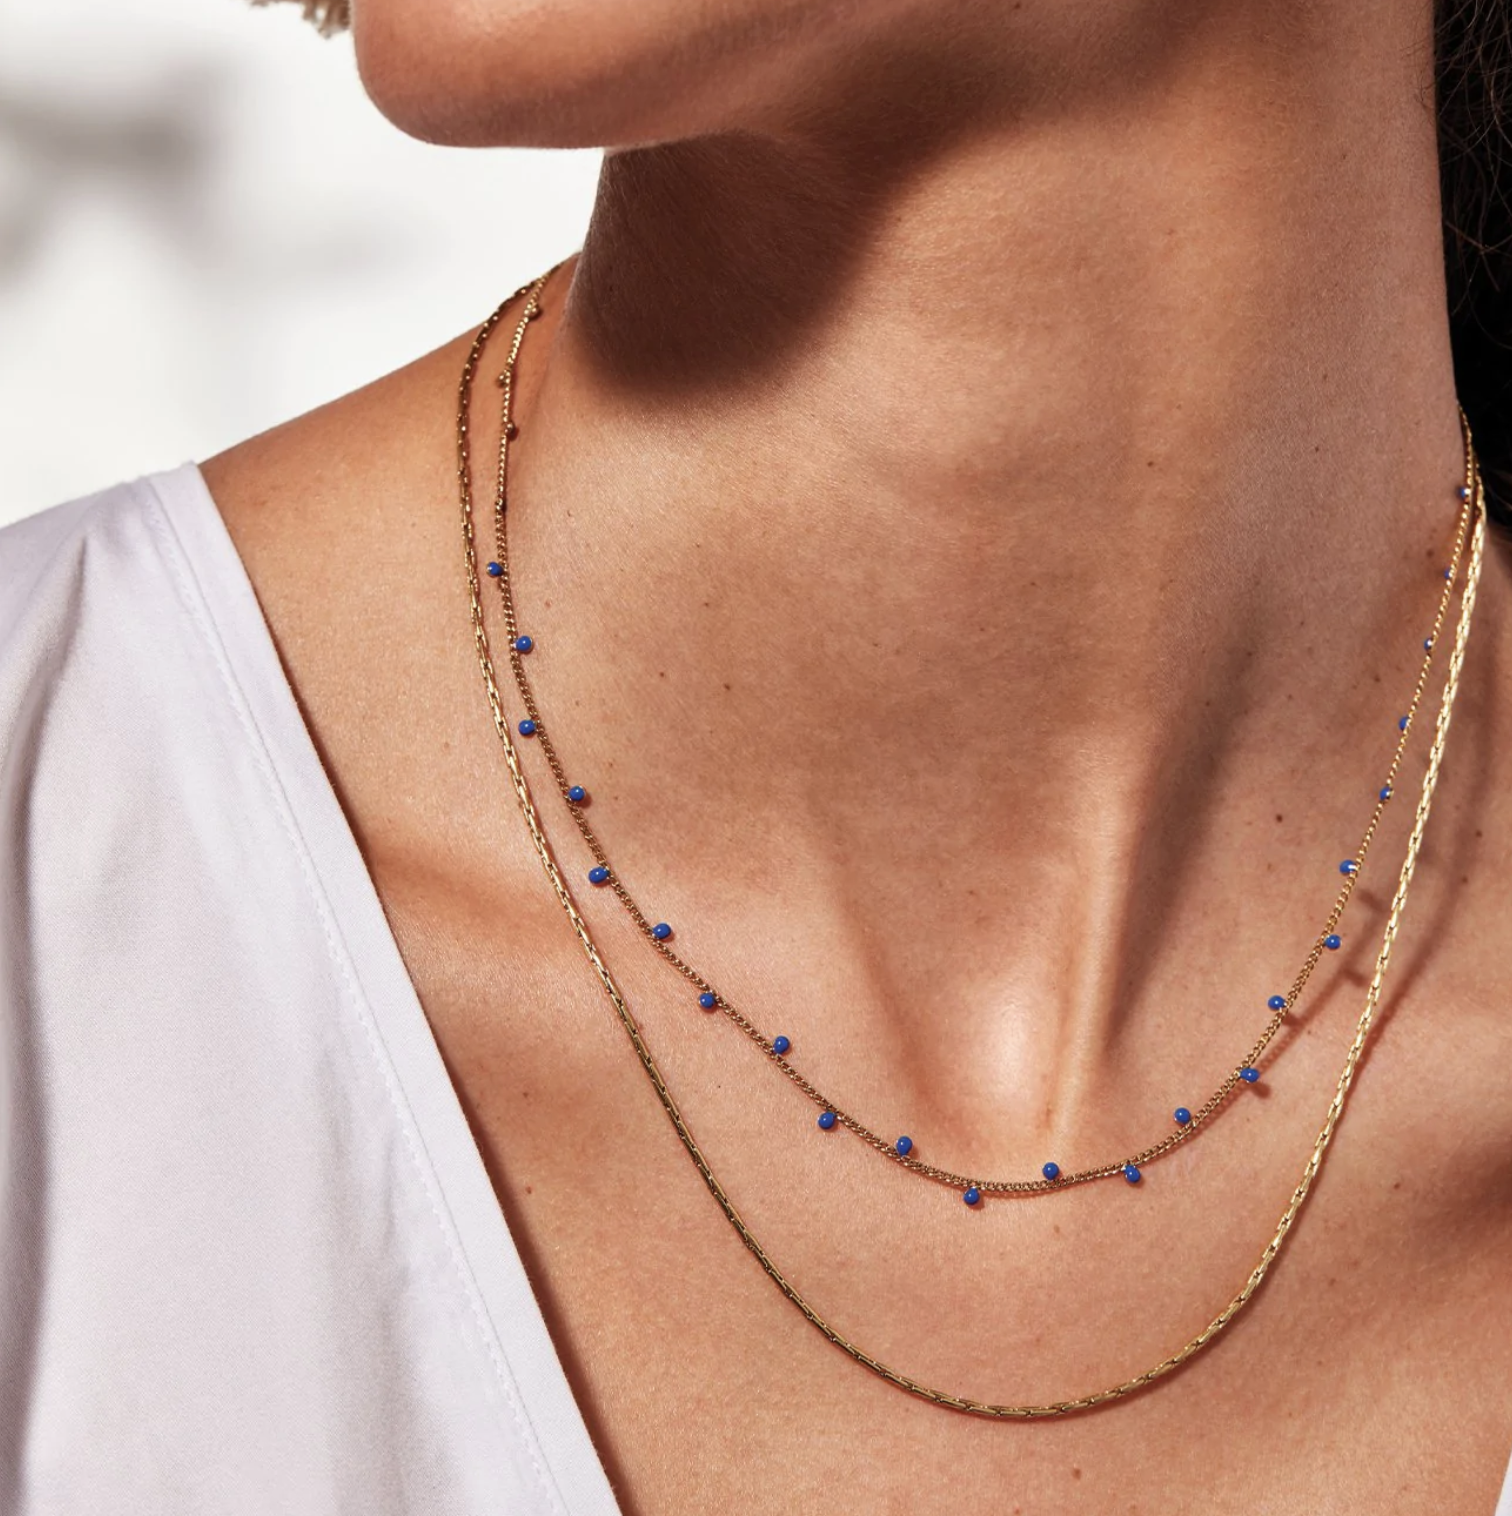 A person wearing the double-strand necklace with a V-neck top